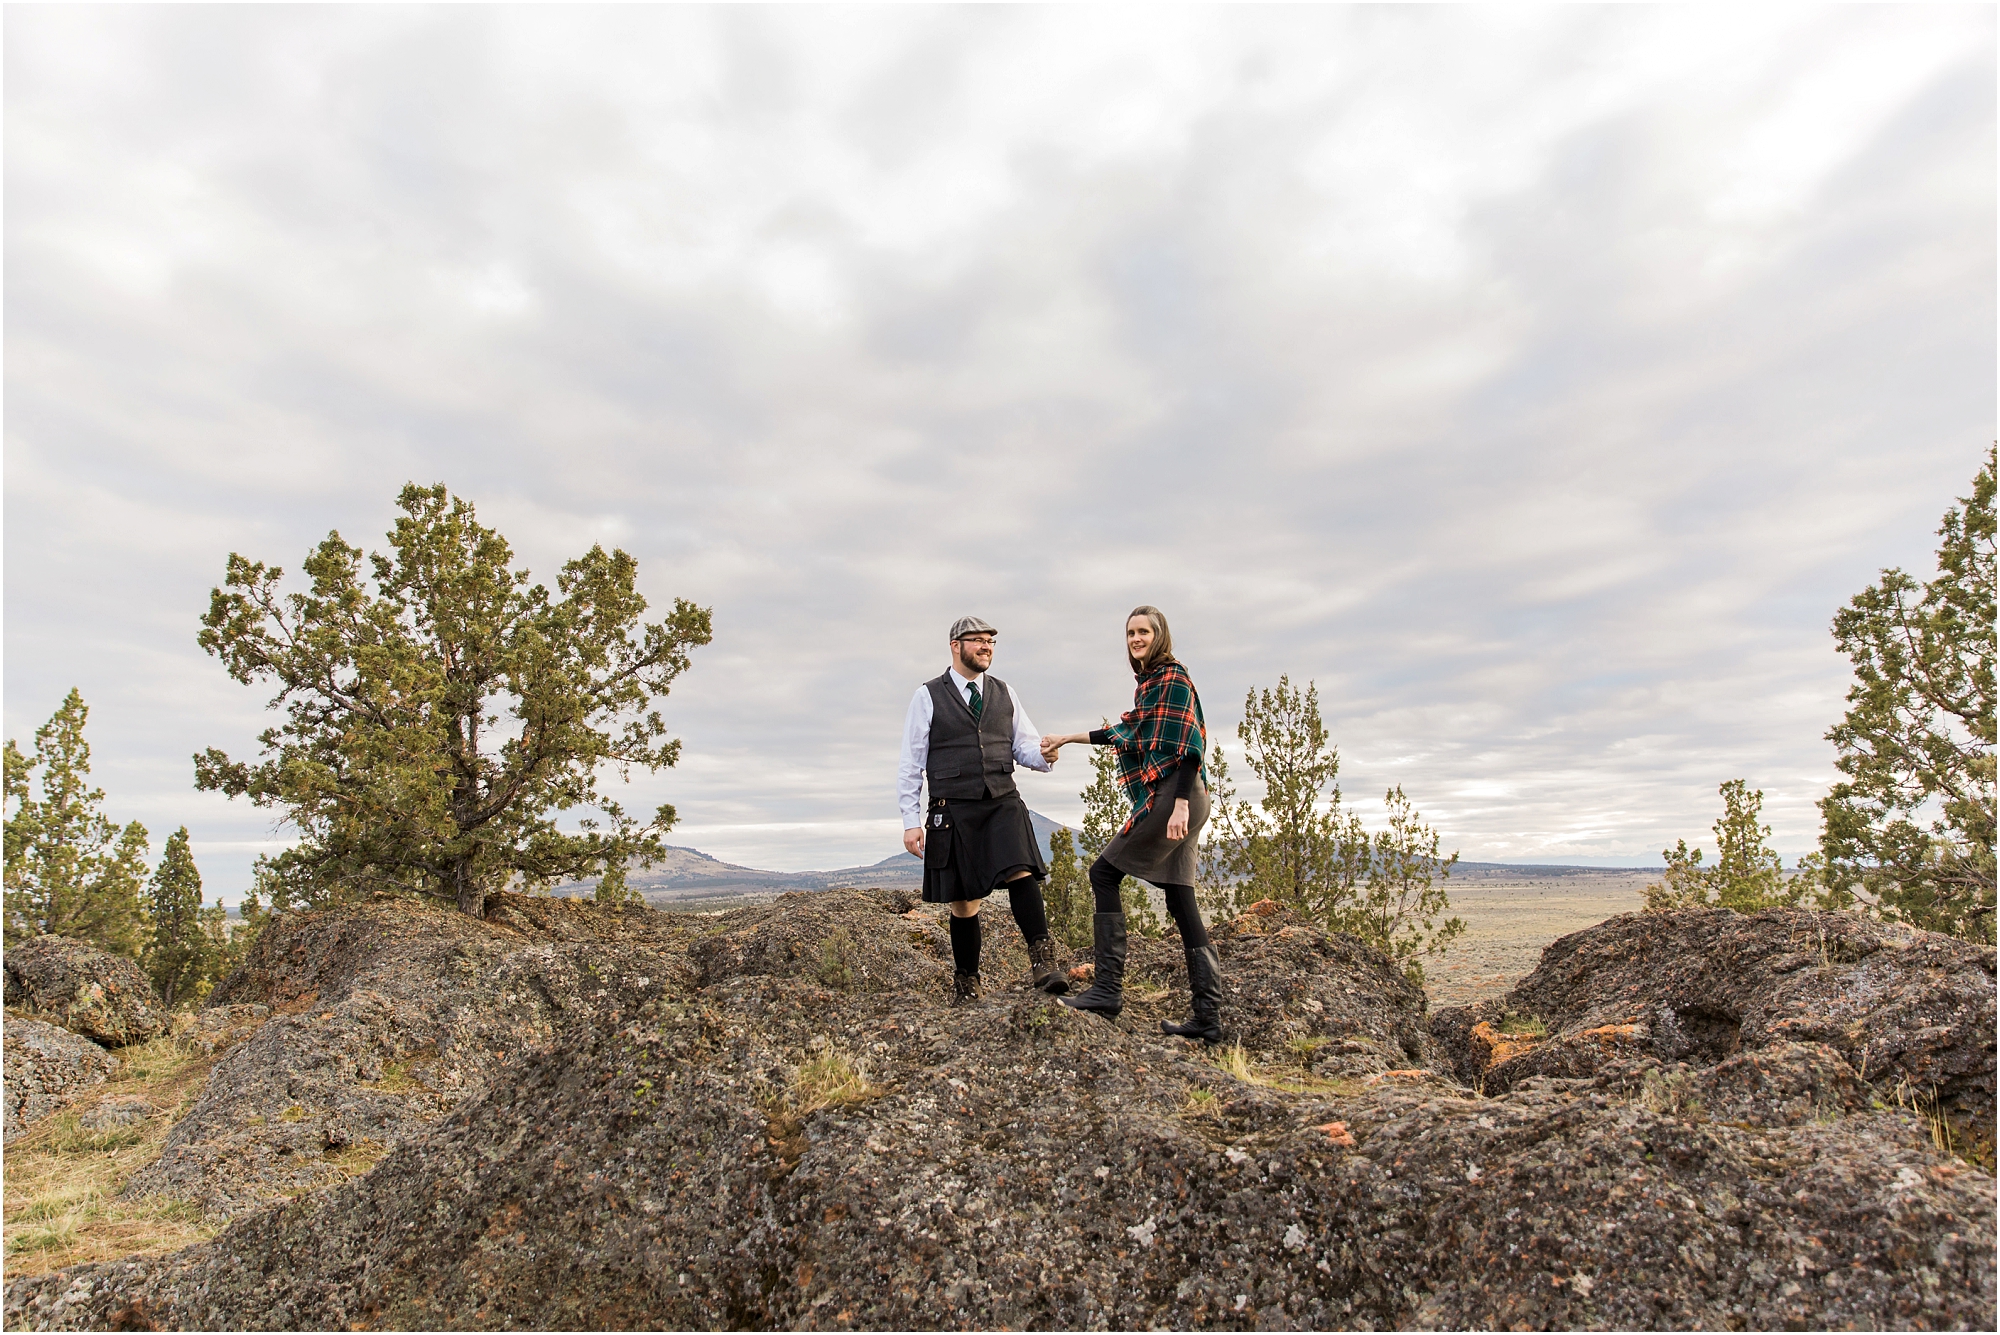 Amazing cloud formations in the sky over the Central Oregon landscape for this Scottish kilted engagement photo session by Bend Oregon wedding photographer Erica Swantek Photography. 